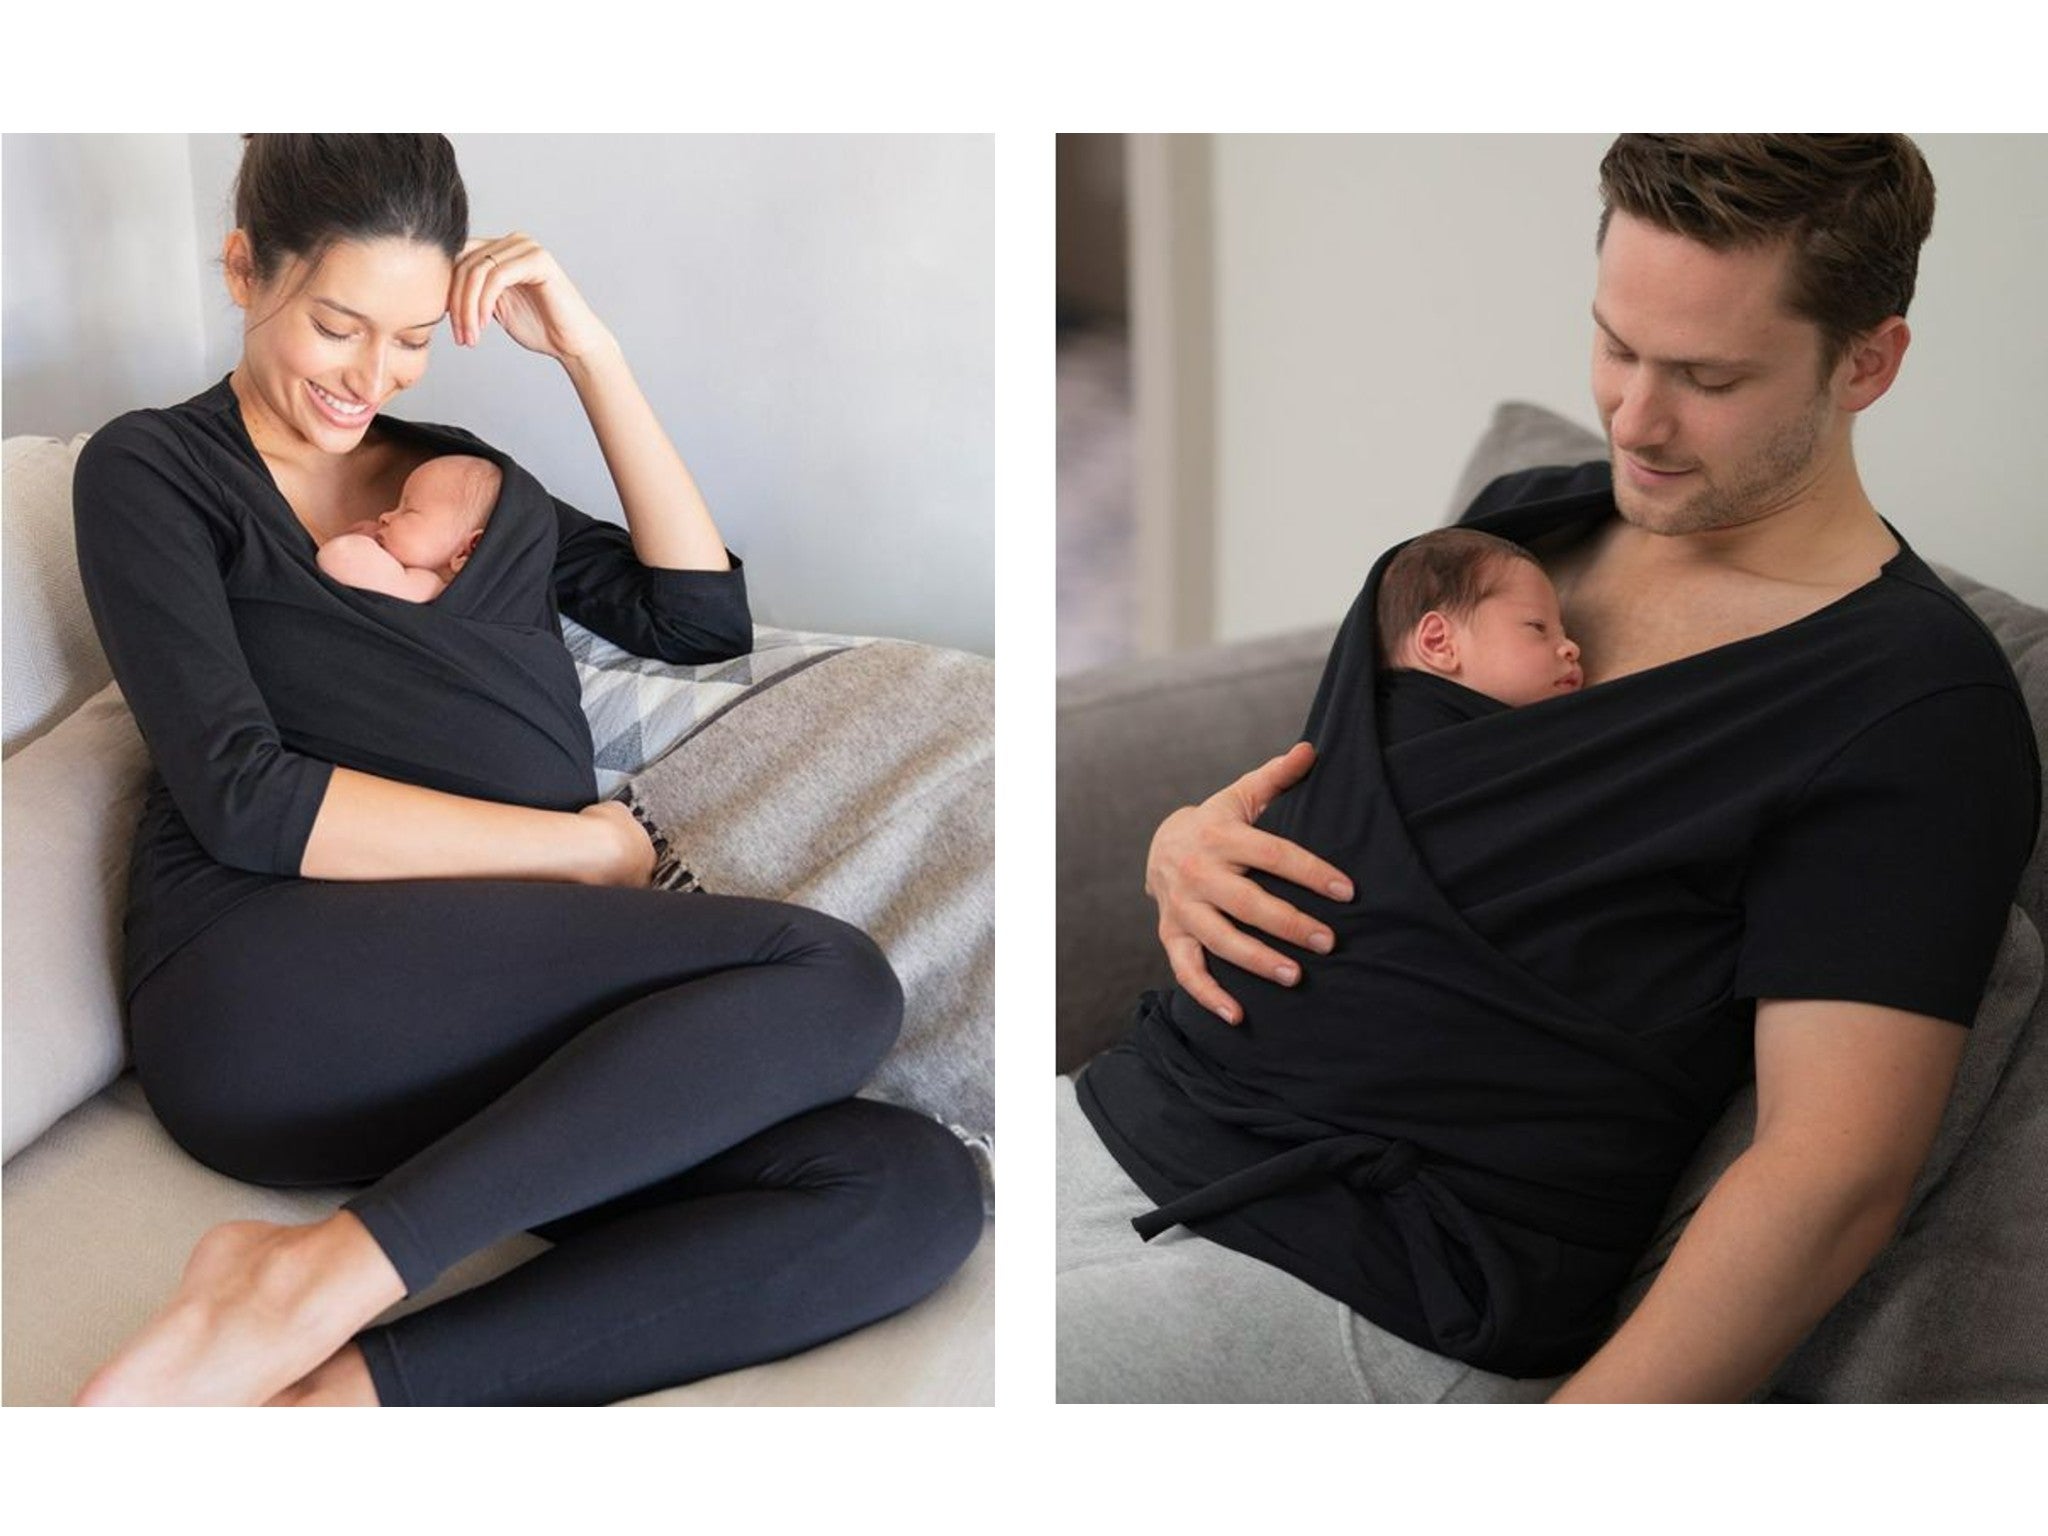 best gifts for new parents